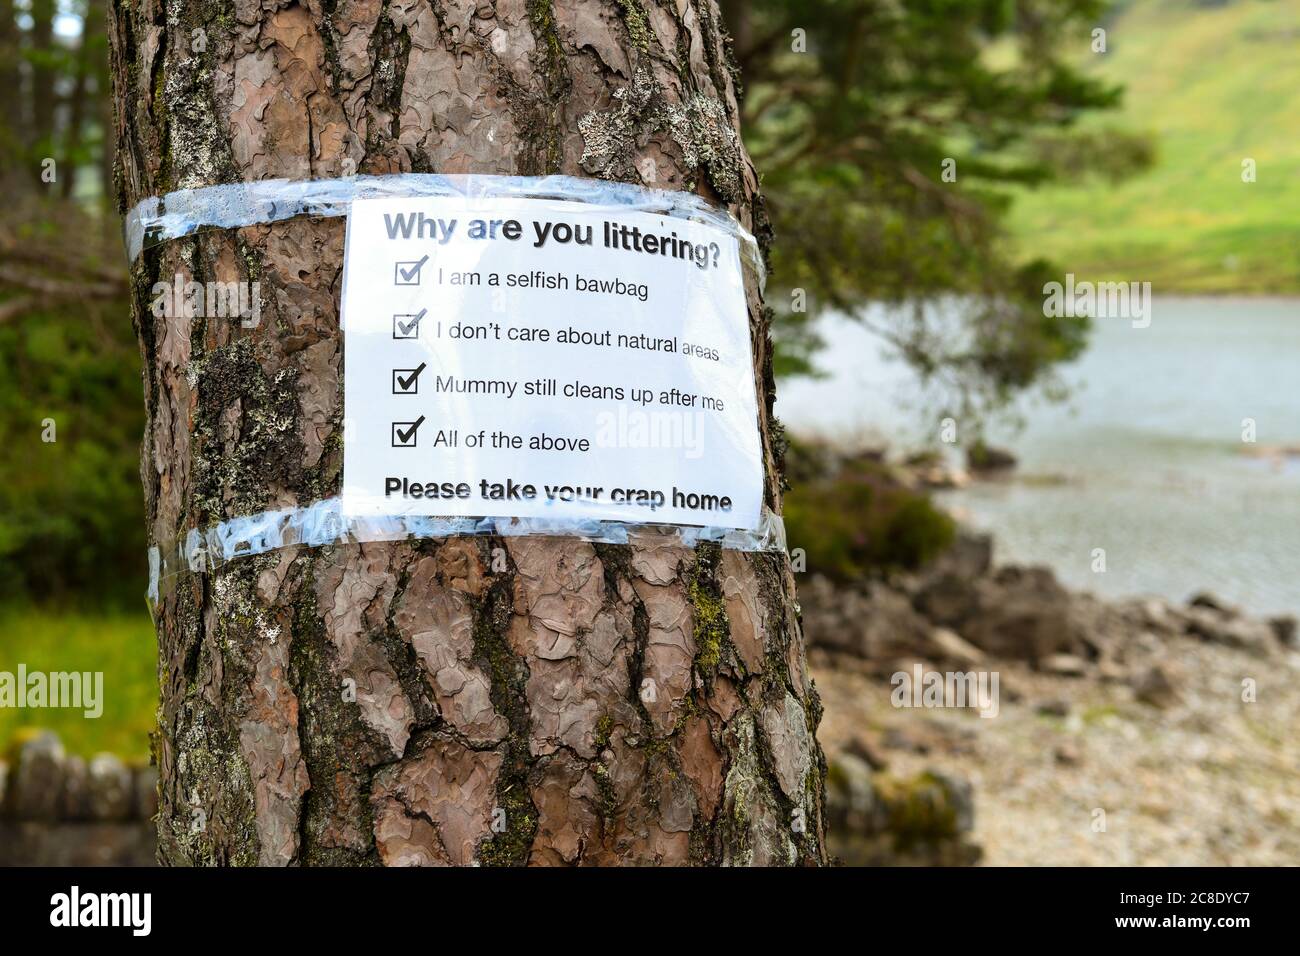 Litter problems constant problem in Loch Lomond and the Trossachs National Park during coronavirus pandemic - sign by Loch Chon asking why - Scotland Stock Photo